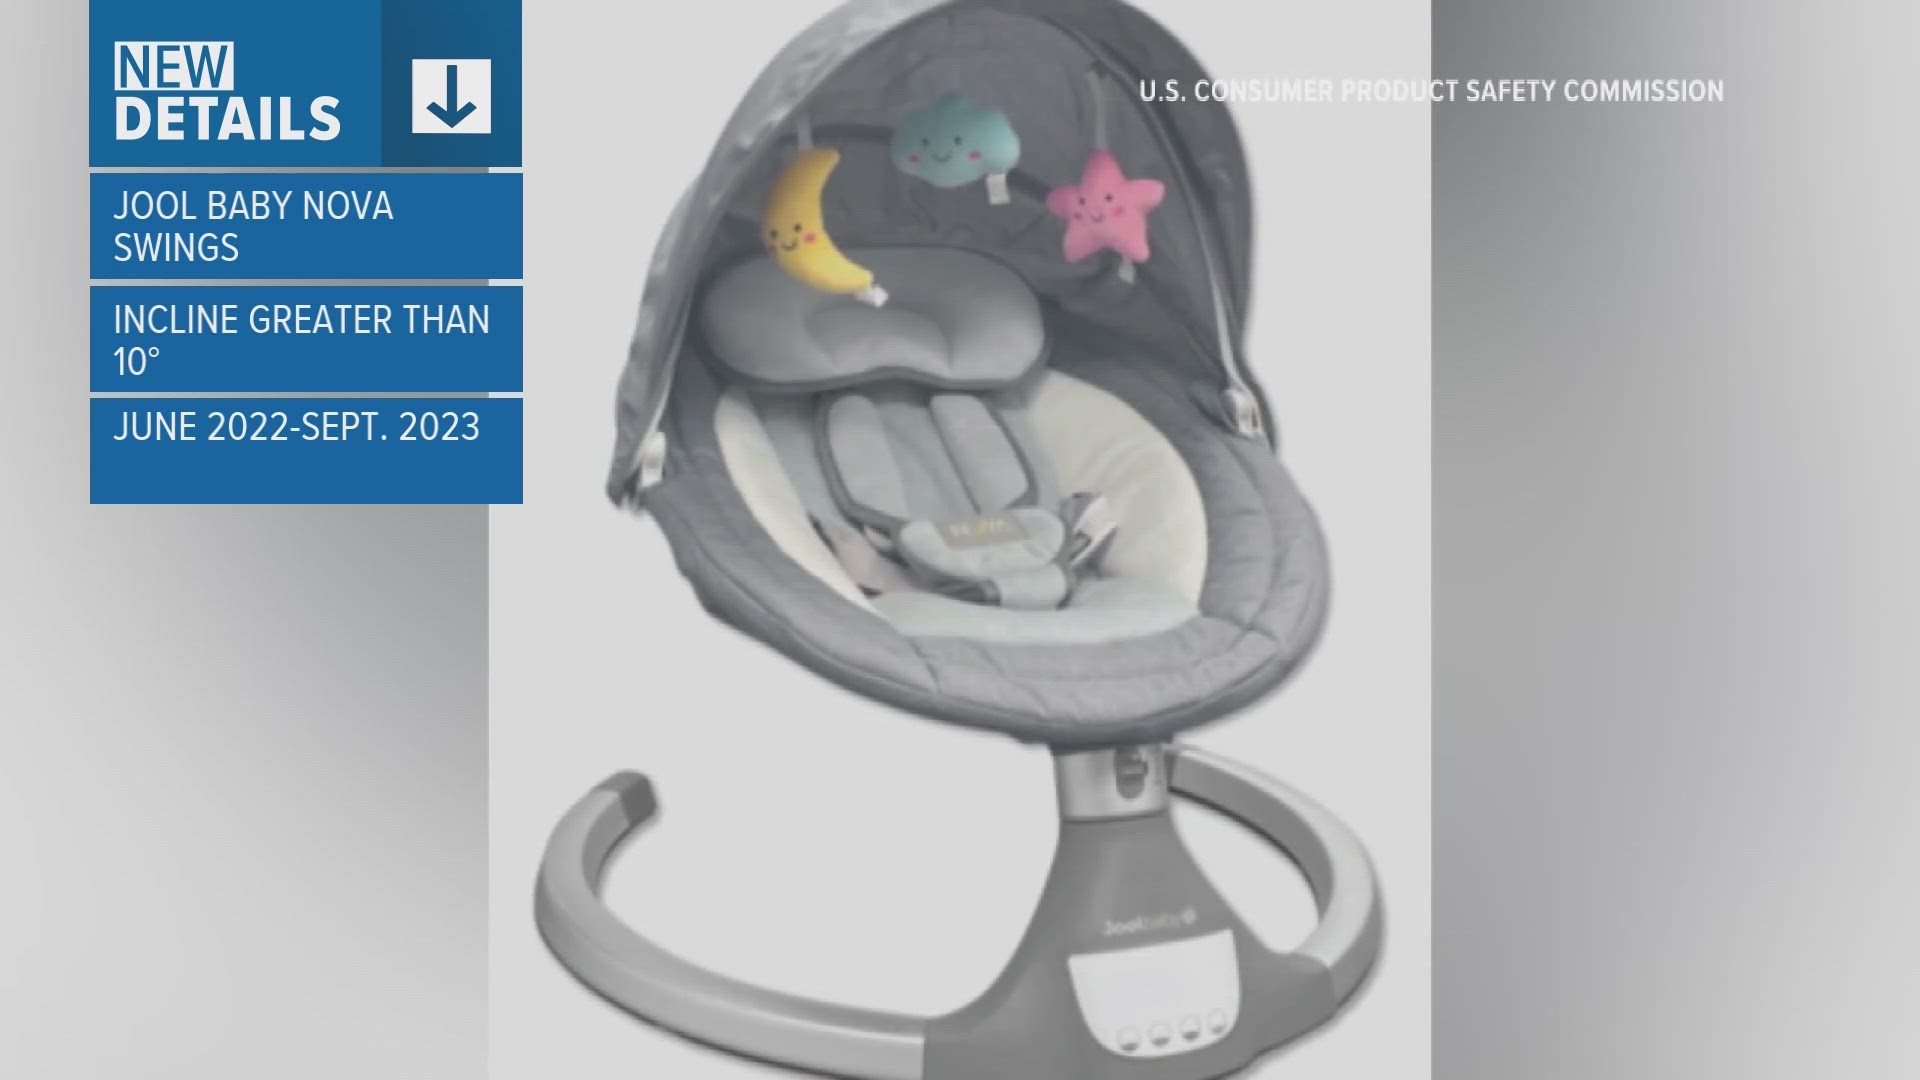 A Consumer Product Safety Commissioner called the recall remedy "worthless" and a "failure" as it will leave the infant swings in homes without major changes.